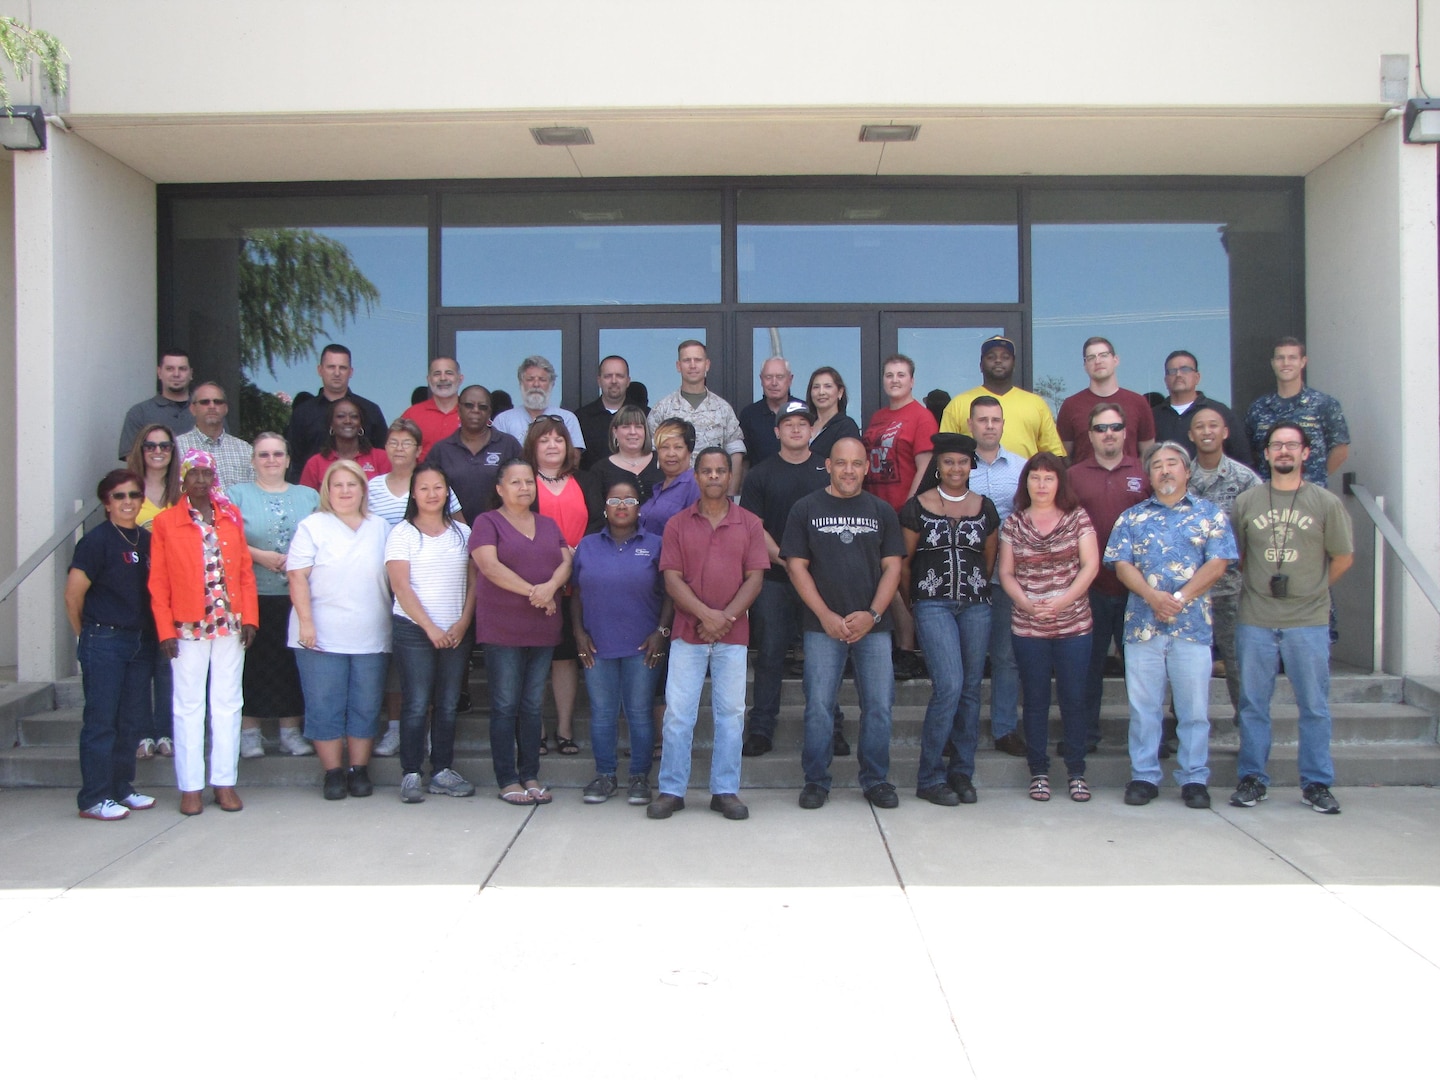 Pictured are members of the inventory and special assistant staff that helped to achieve positive results during the recent DoD Inspector General Audit that took place over three days beginning June 1, at DLA Distribution San Joaquin, Calif.